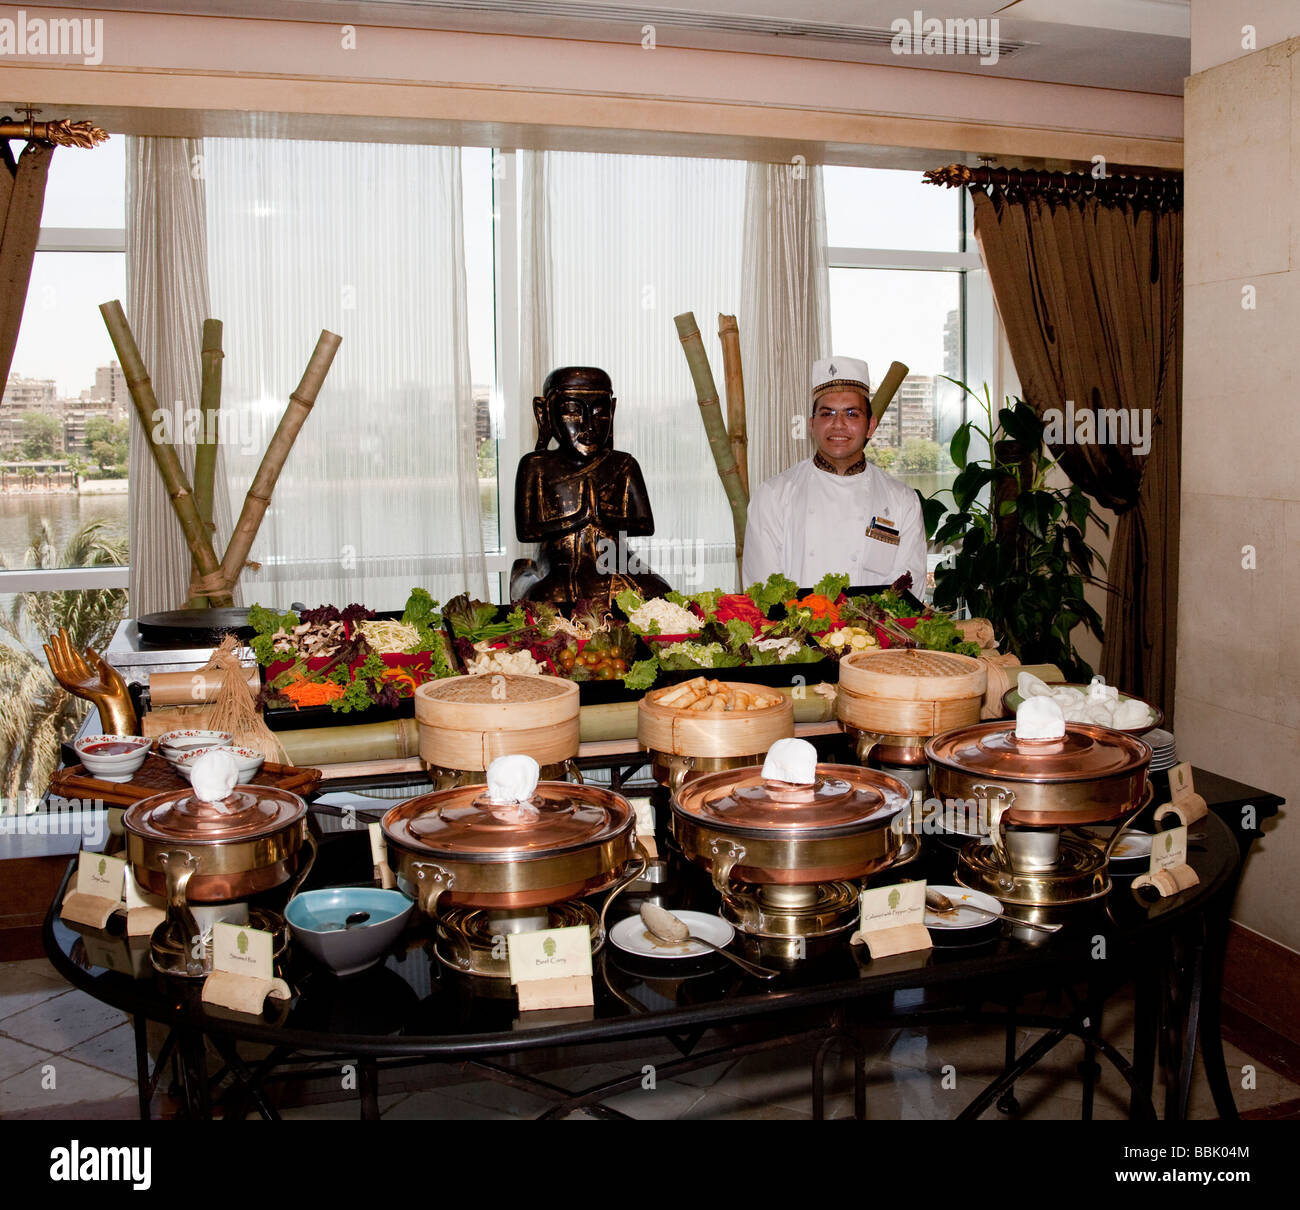 Asia food buffet, Four Seasons Hotel, Giza, Le Caire, Egypte Banque D'Images